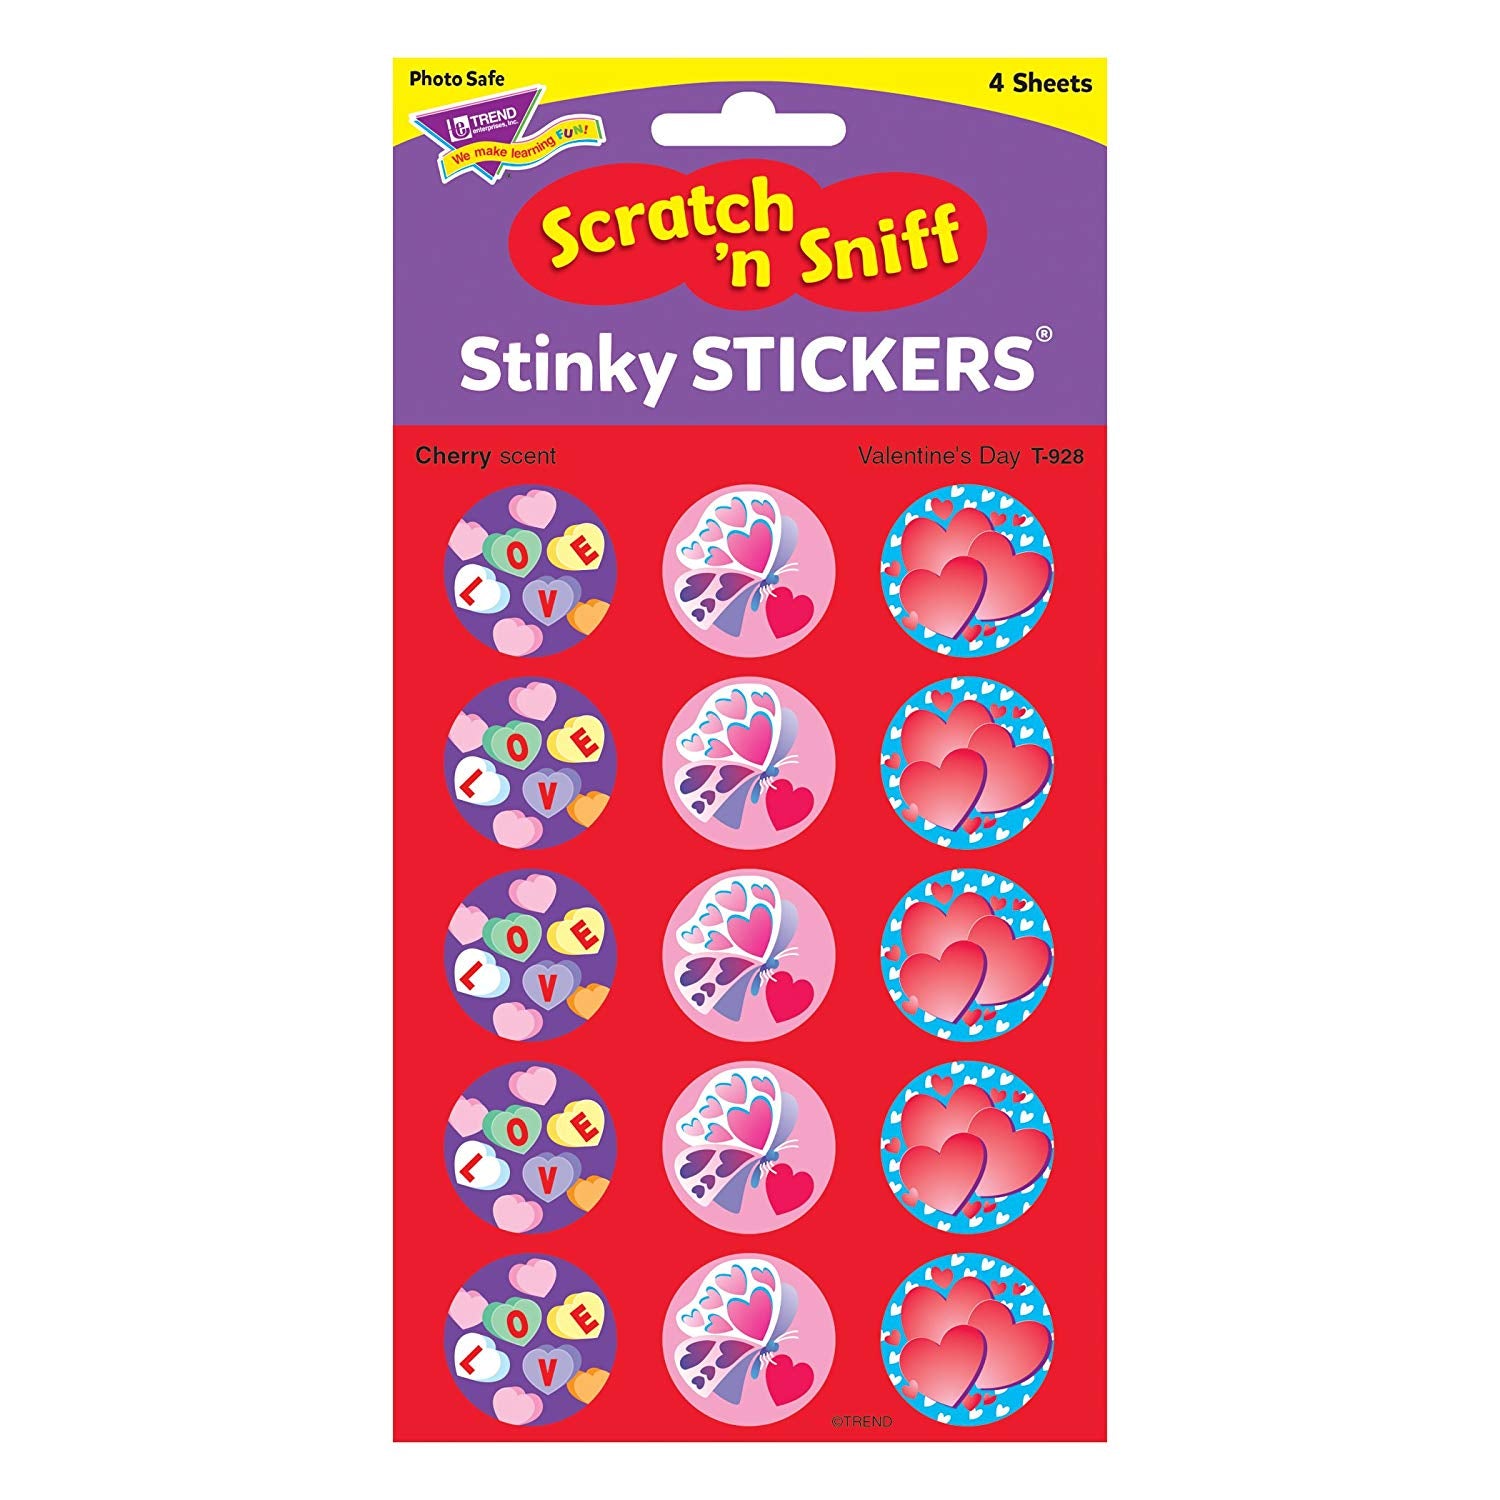 Trend Stinky Stickers Scratch and Sniff -Cherry Scent Hearts Valentines Day (T928)